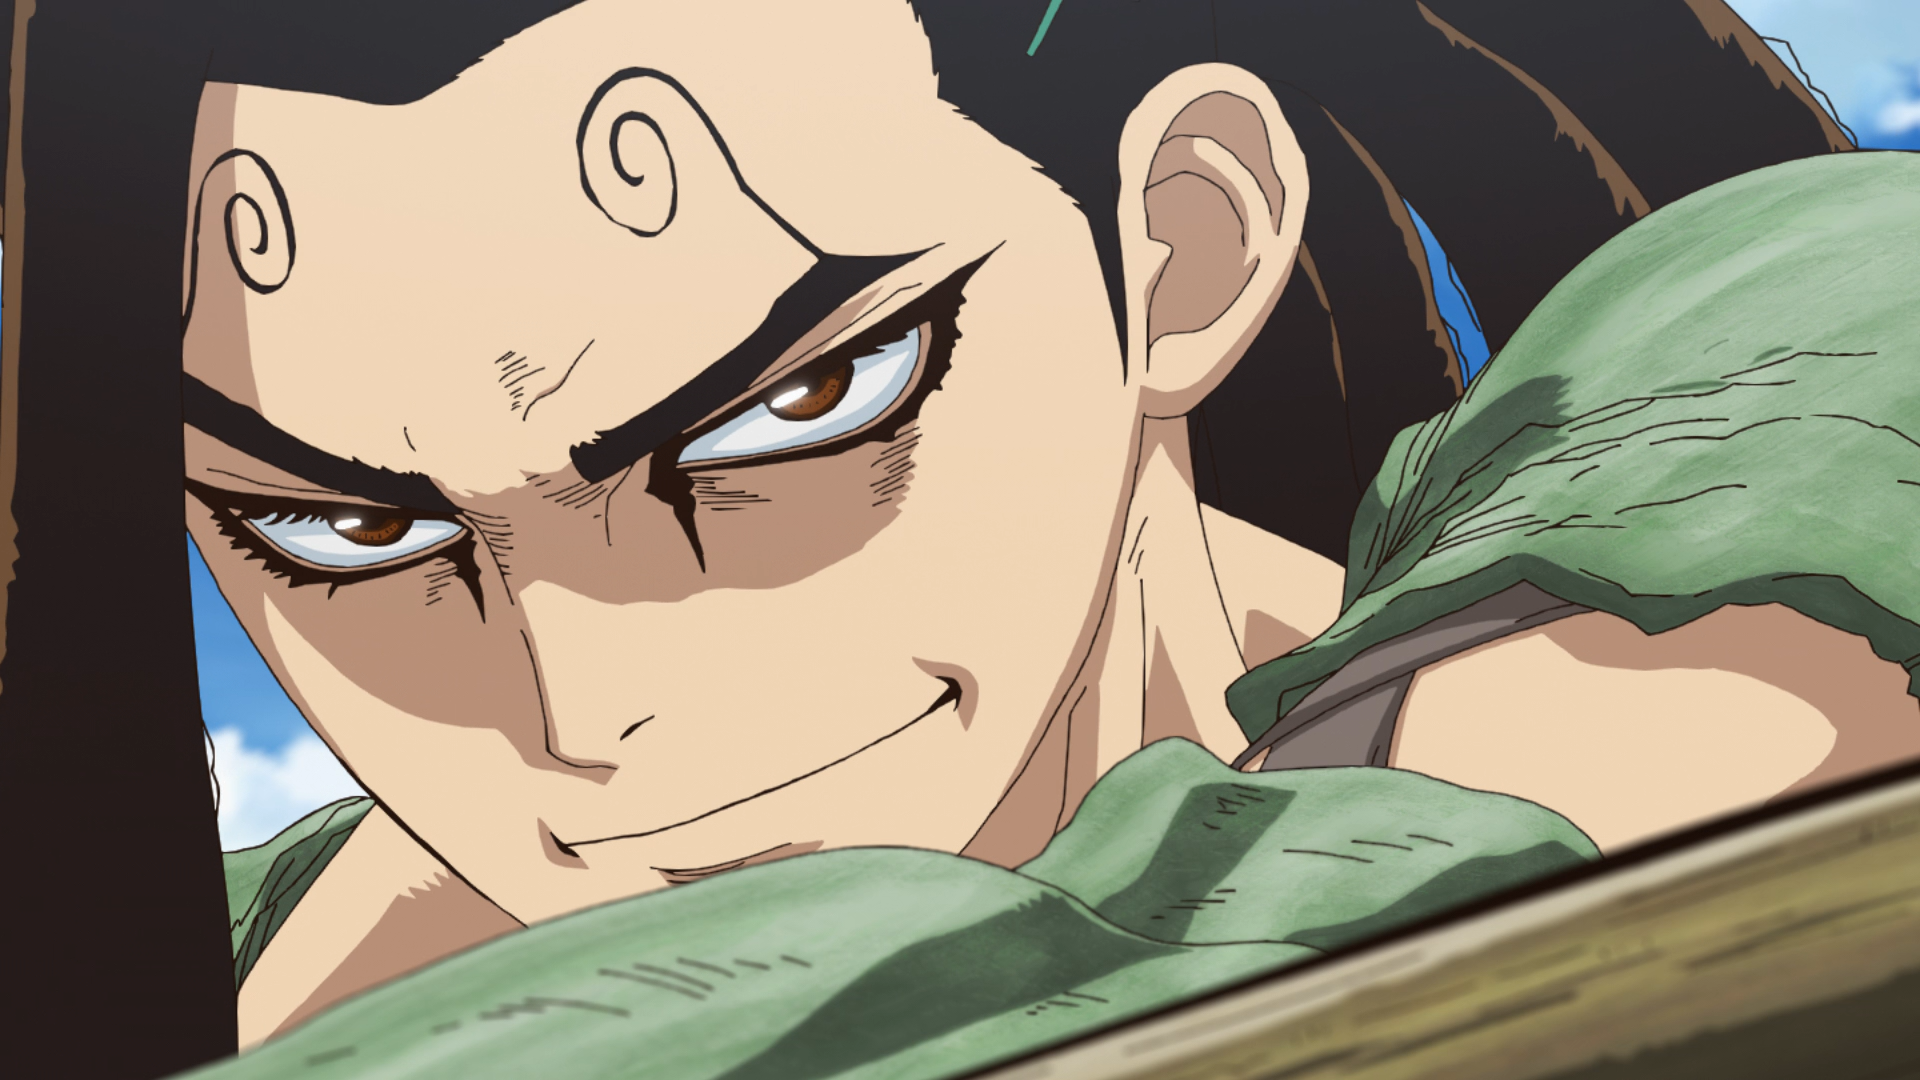 Dr. Stone: New World Episode 17 Review - I drink and watch anime